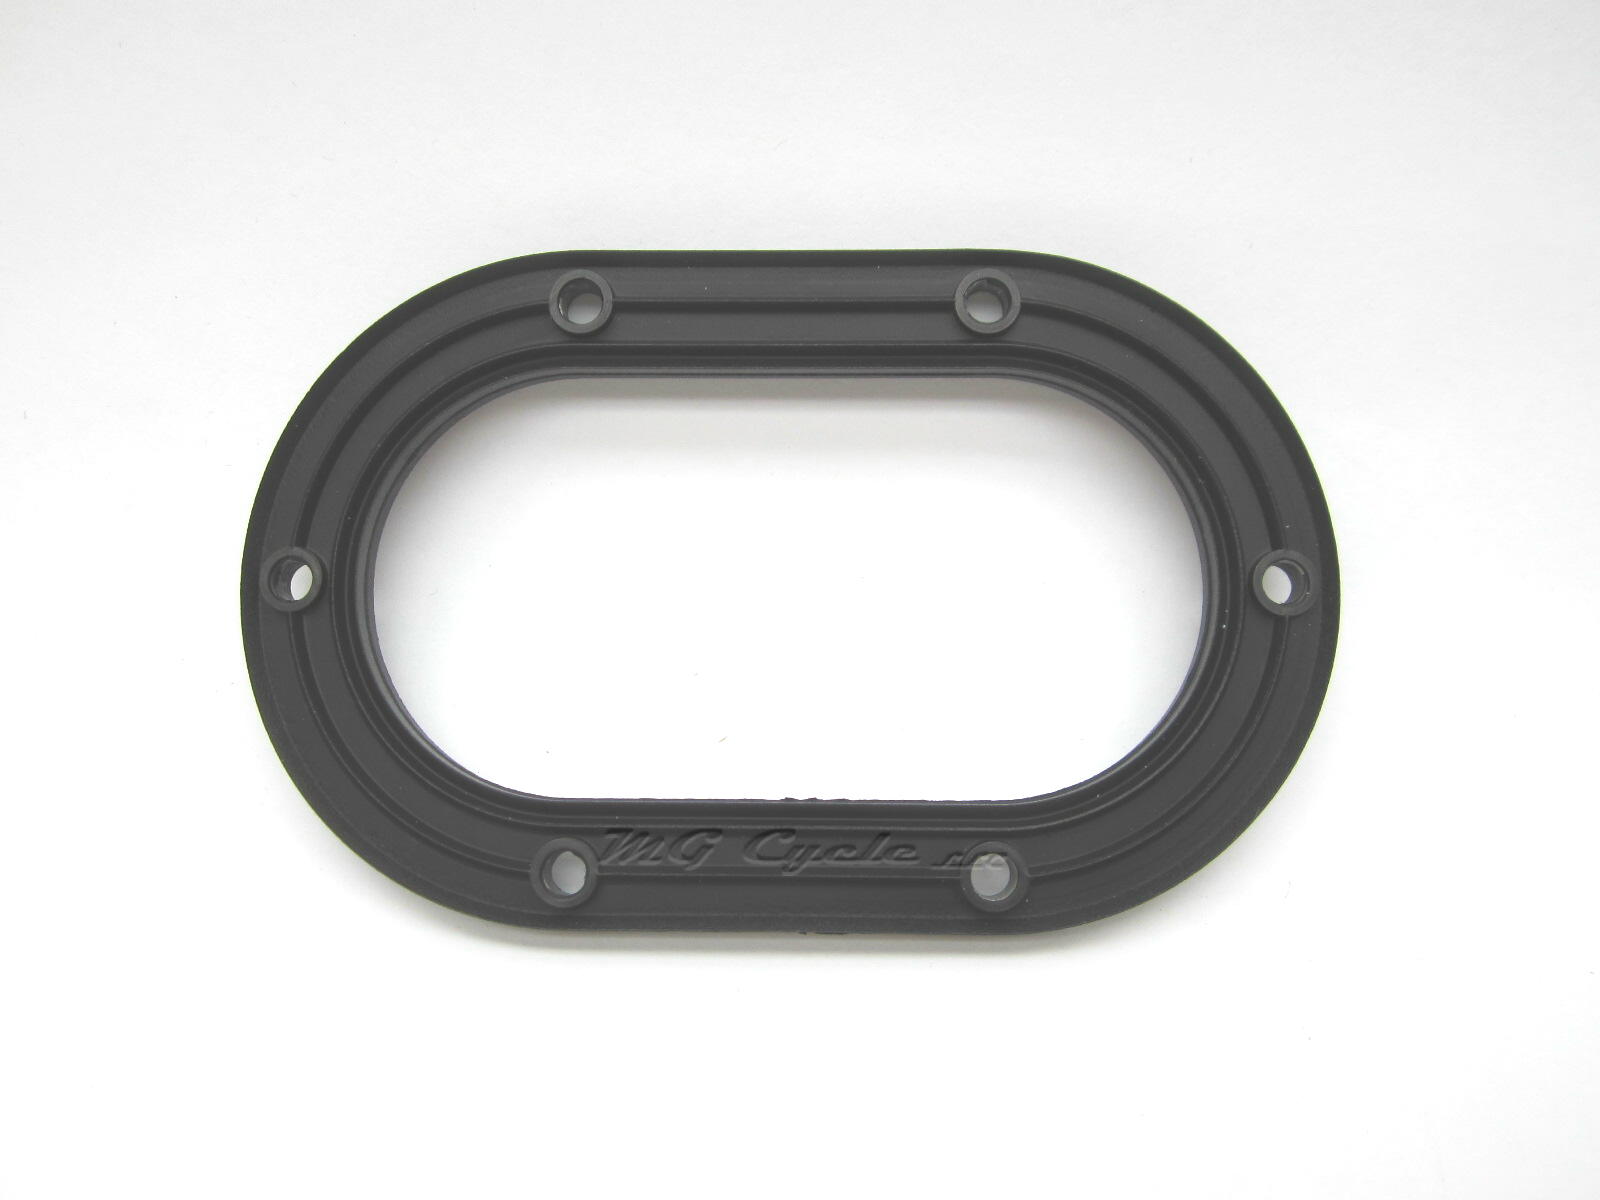 gasket for internal fuel pump to fuel tank